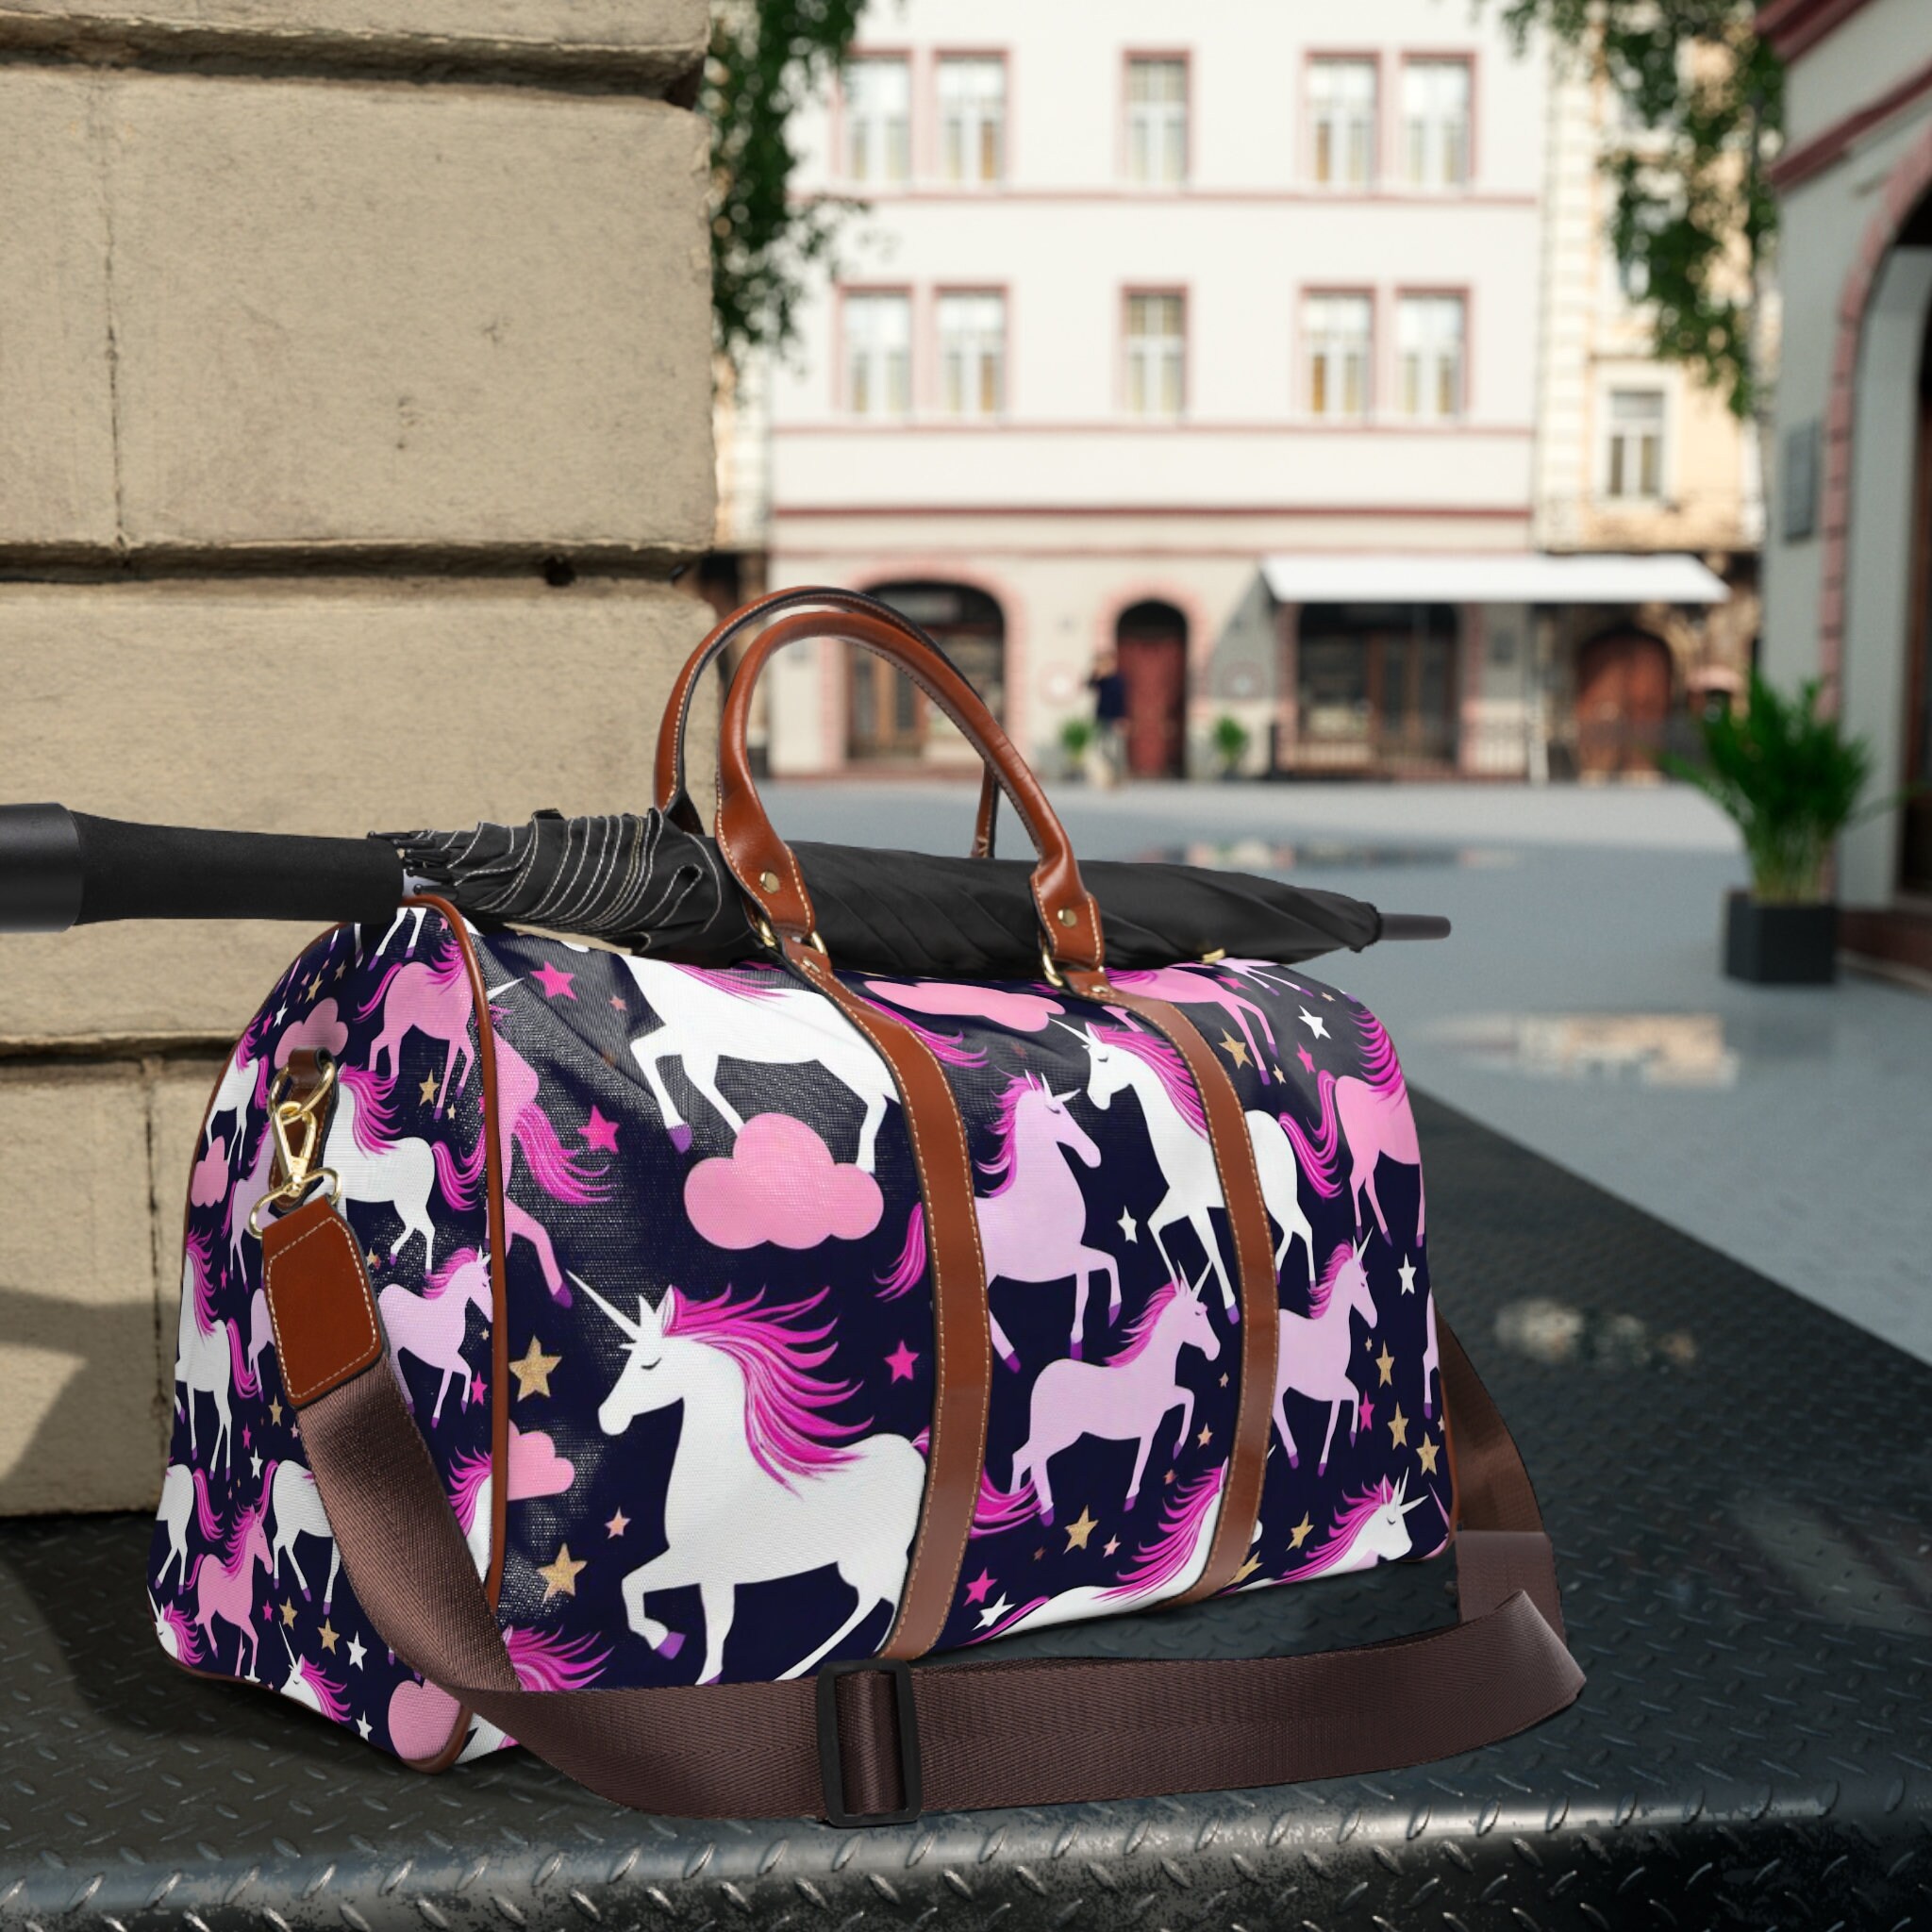 Pink and Lavender Unicorn Duffle Bag